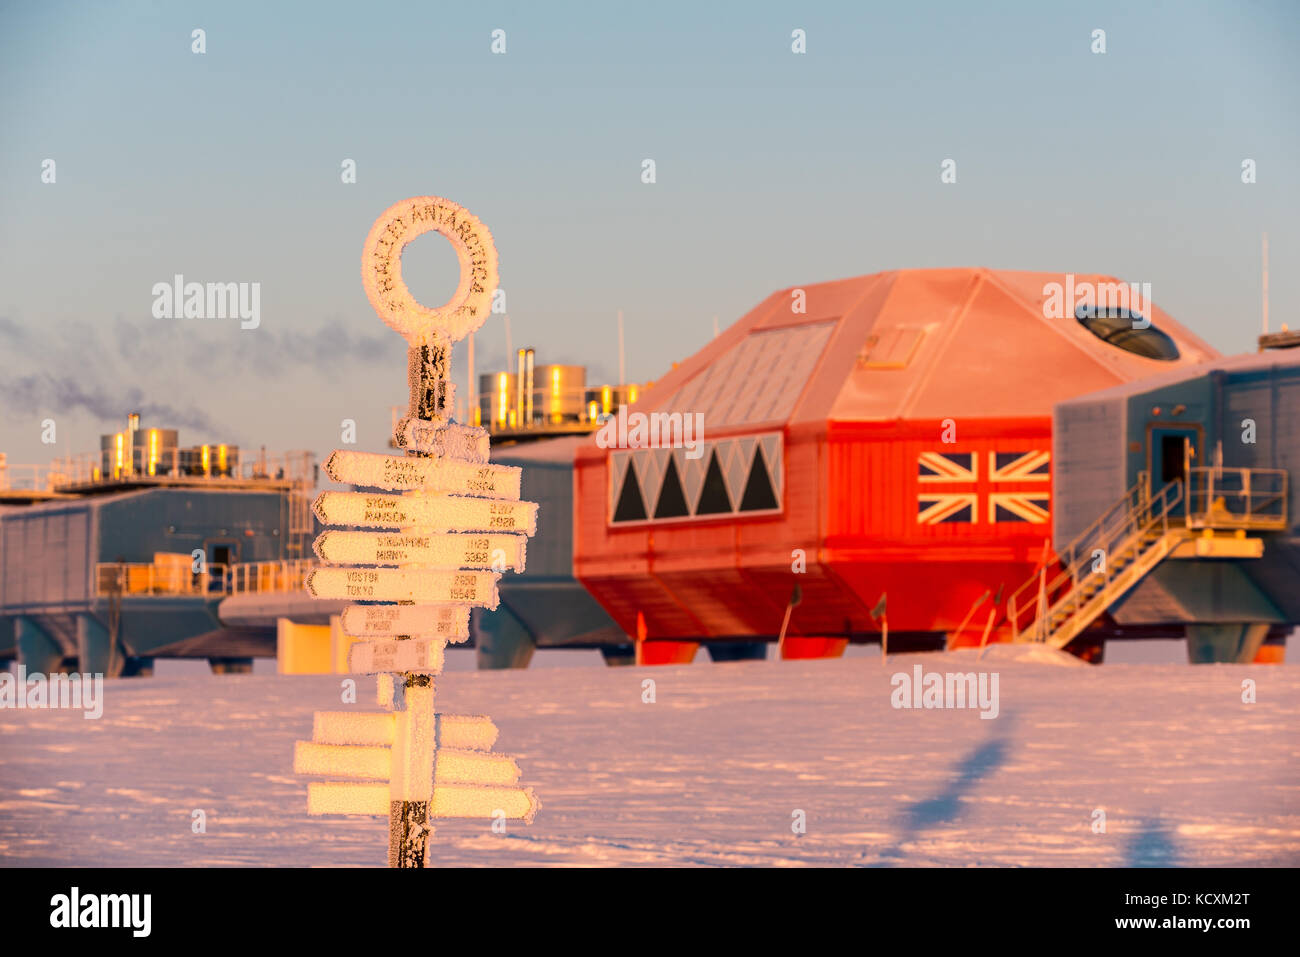 A frosty Halley Research Station in the morning sun. Stock Photo